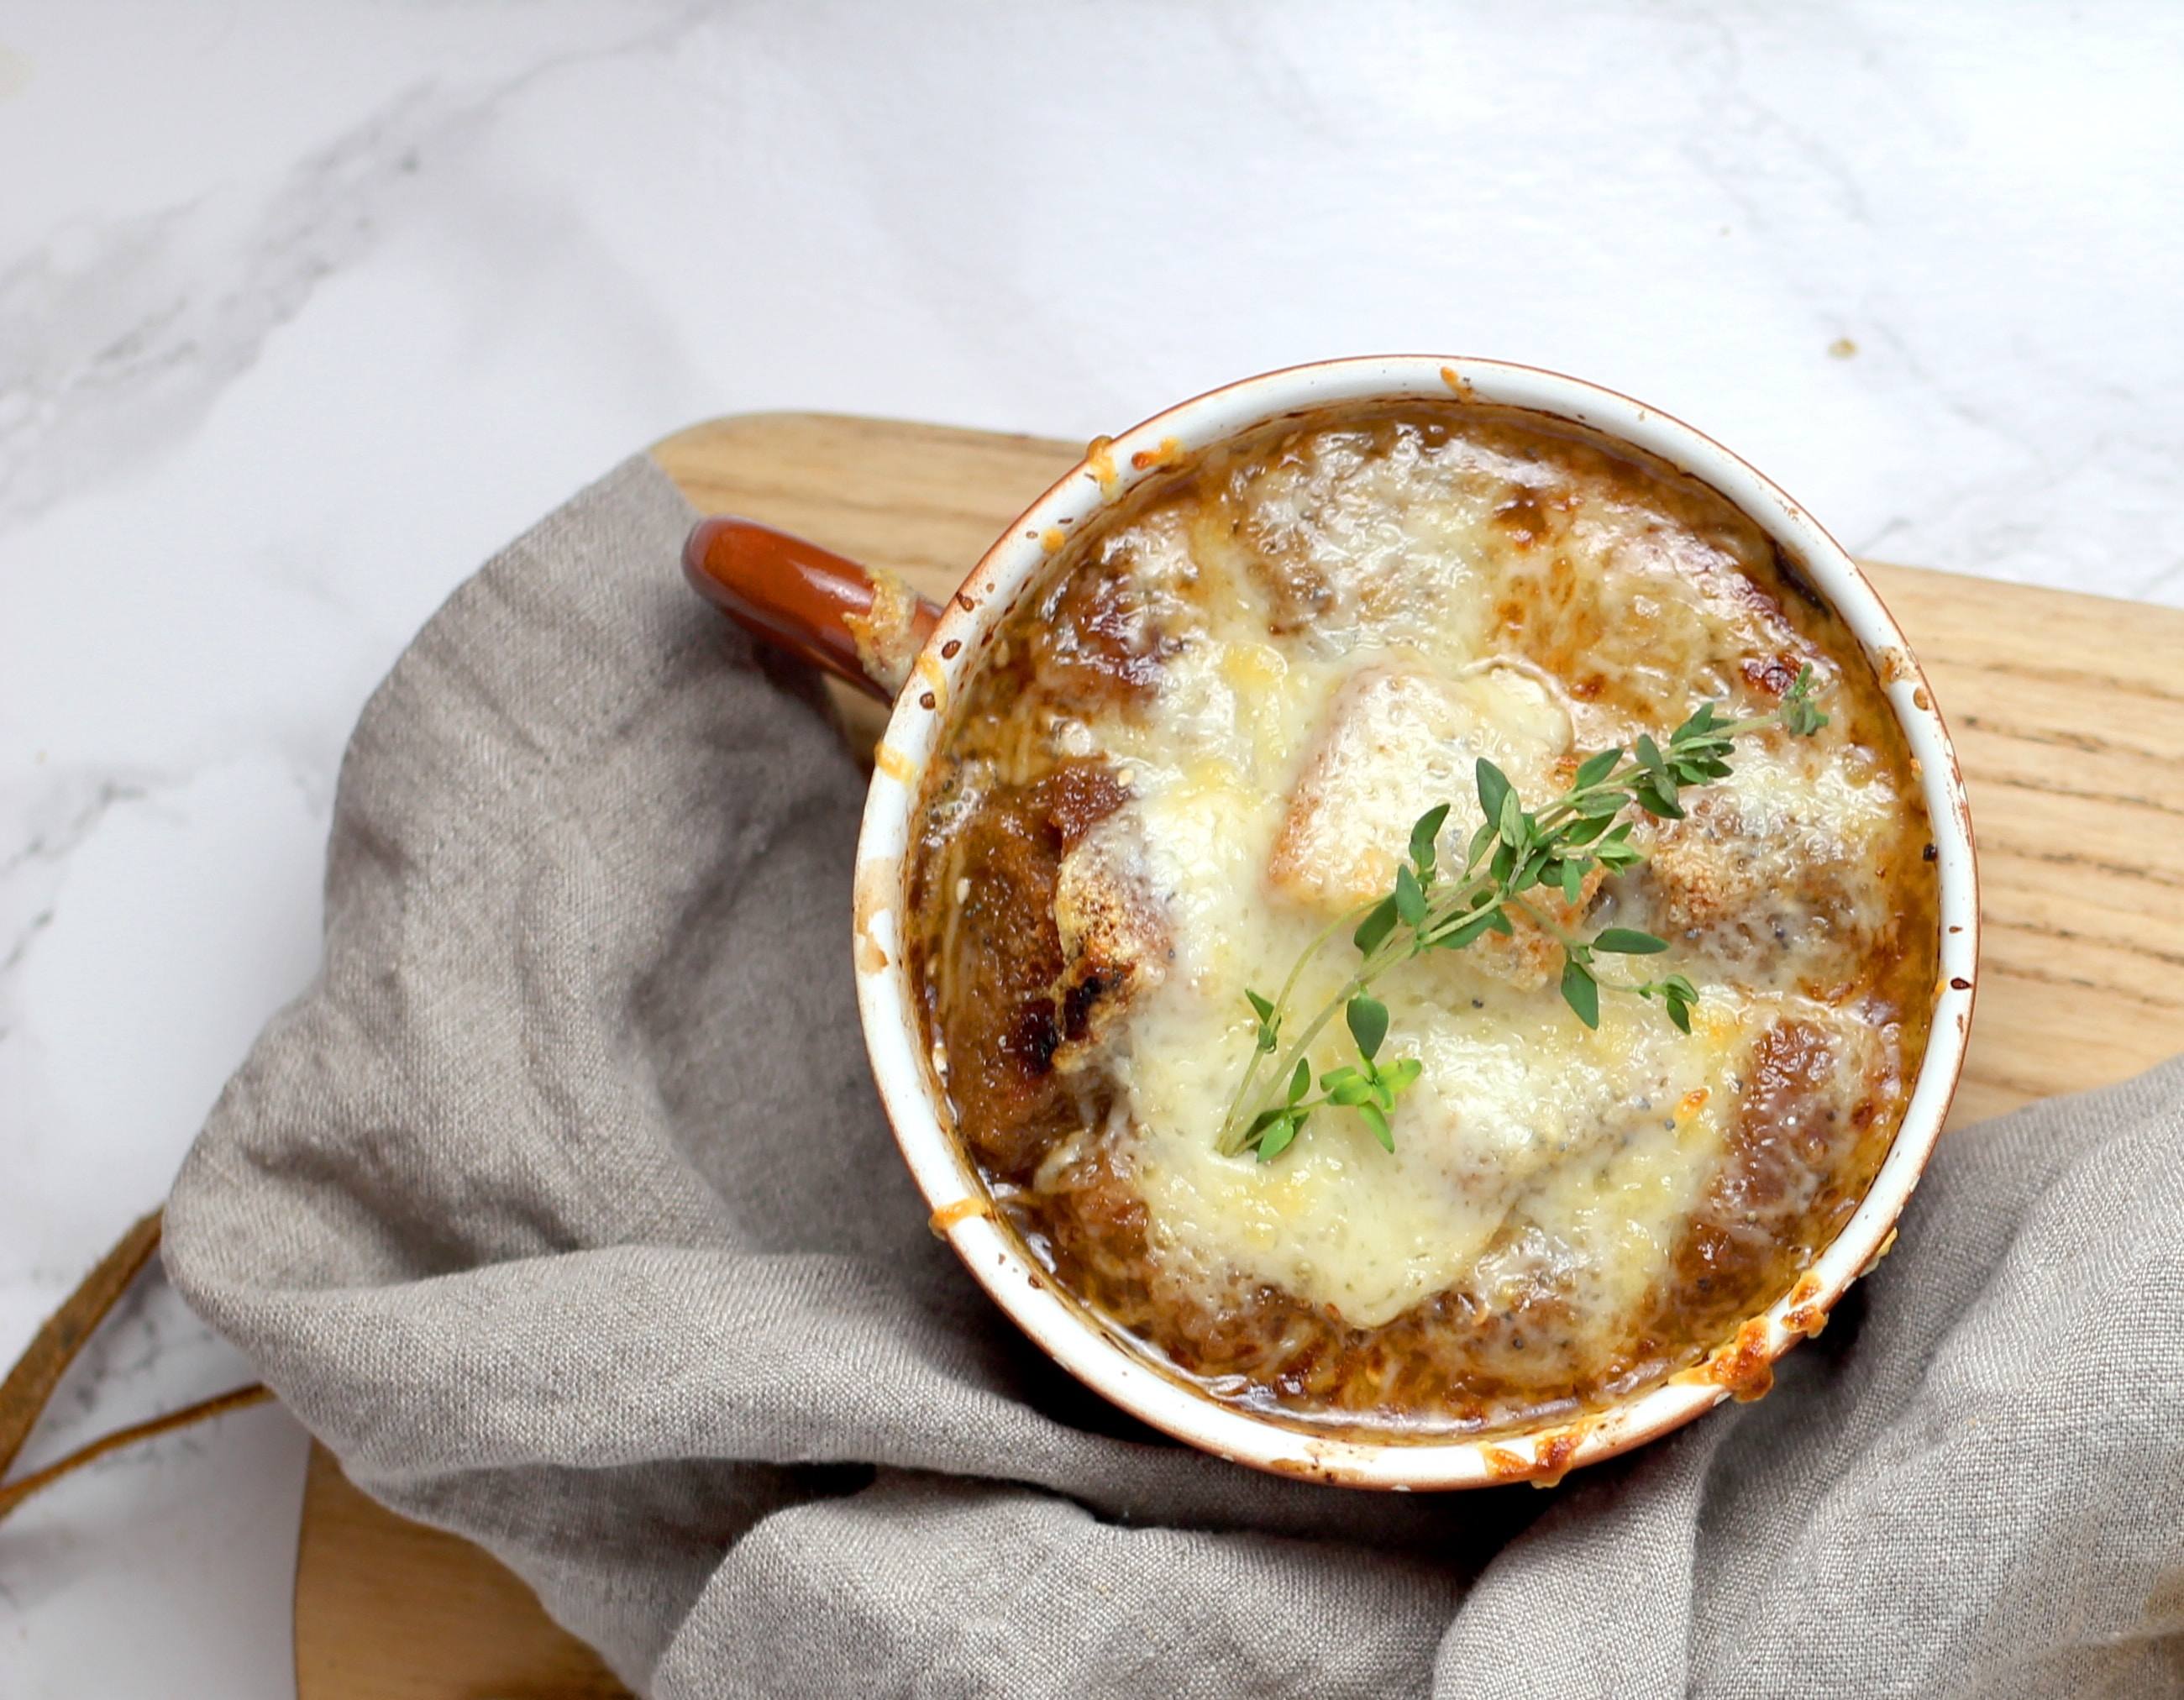 Make Rainy Days Extra Special with This French Onion Soup